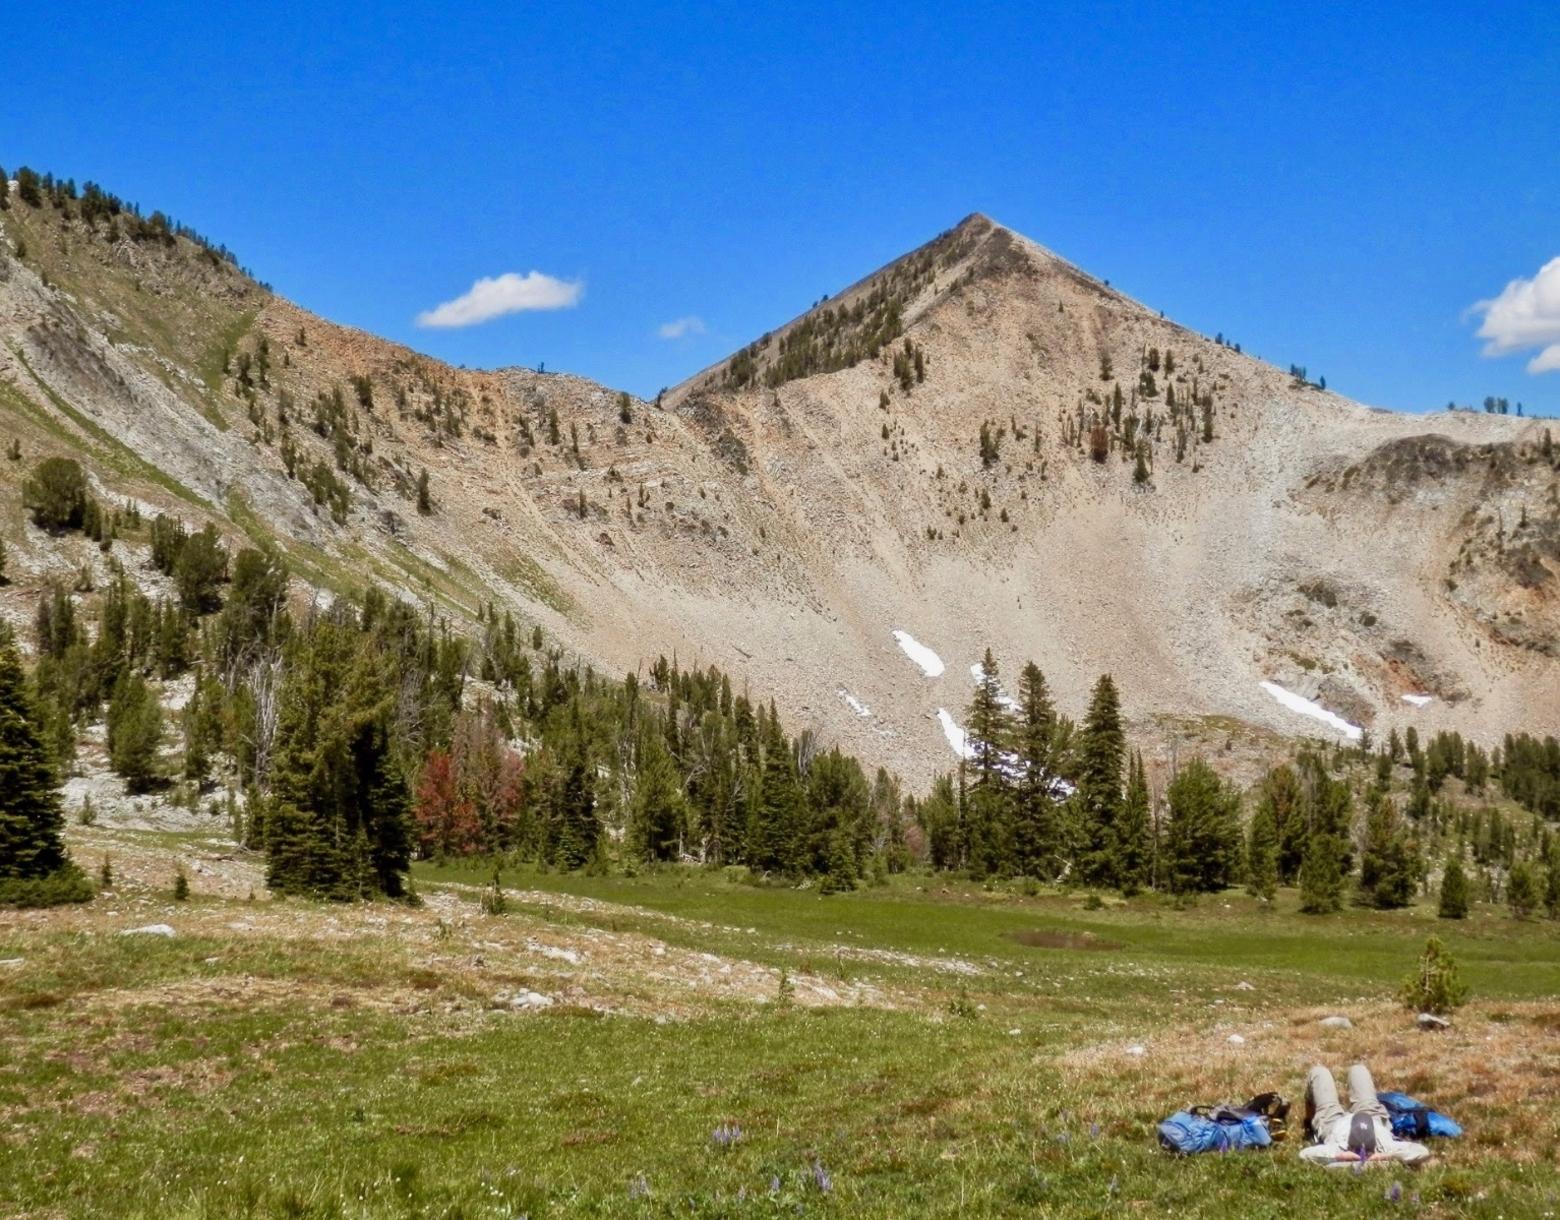 The author takes a rest on the Continental Divide Trail in the Anaconda-Pintler Wilderness. Photo courtesy Michael Dax